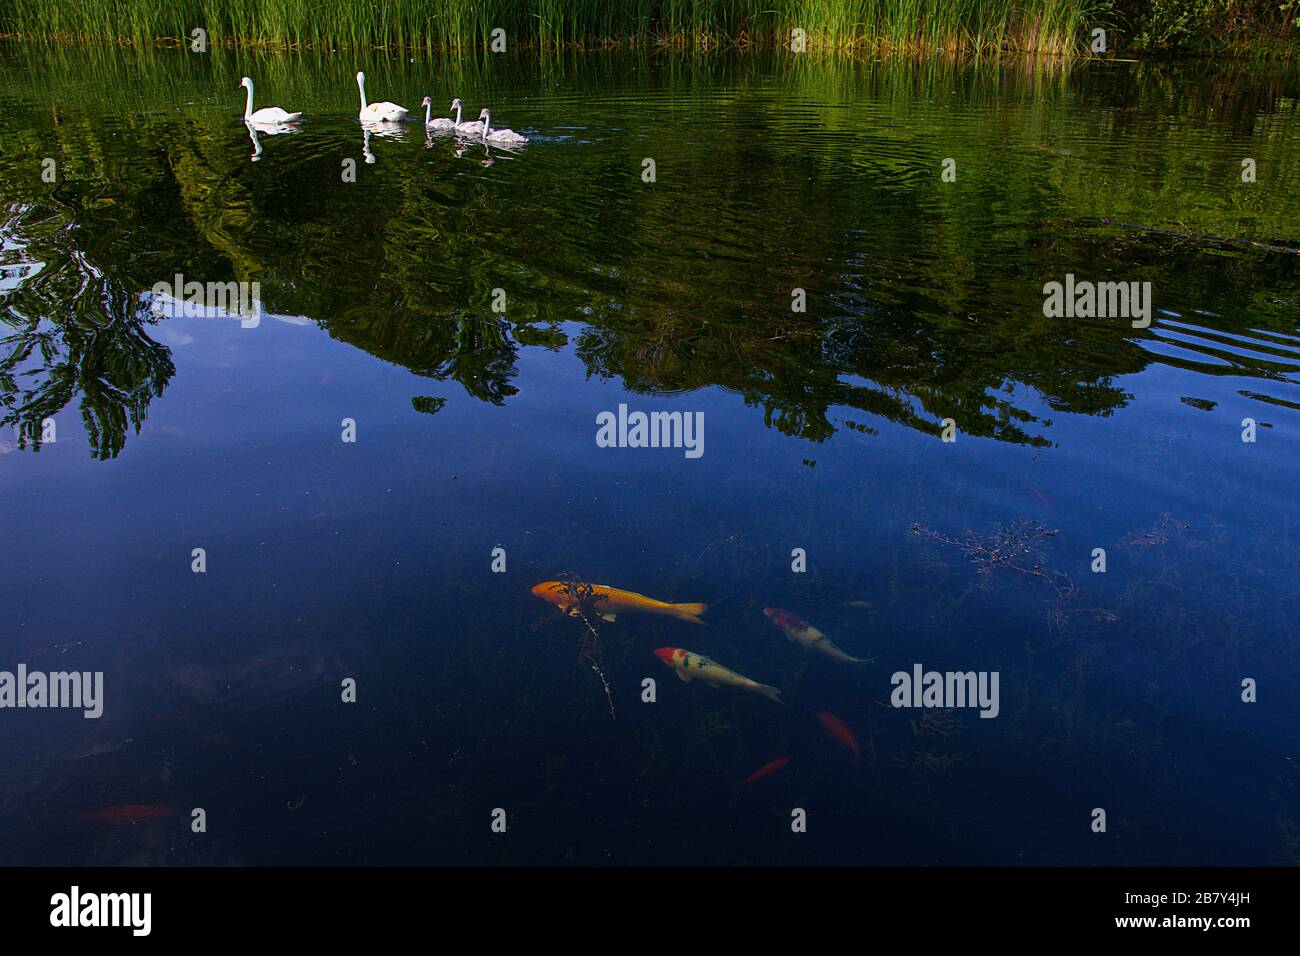 wildlife swan swimming in the pond with koi fishes Stock Photo